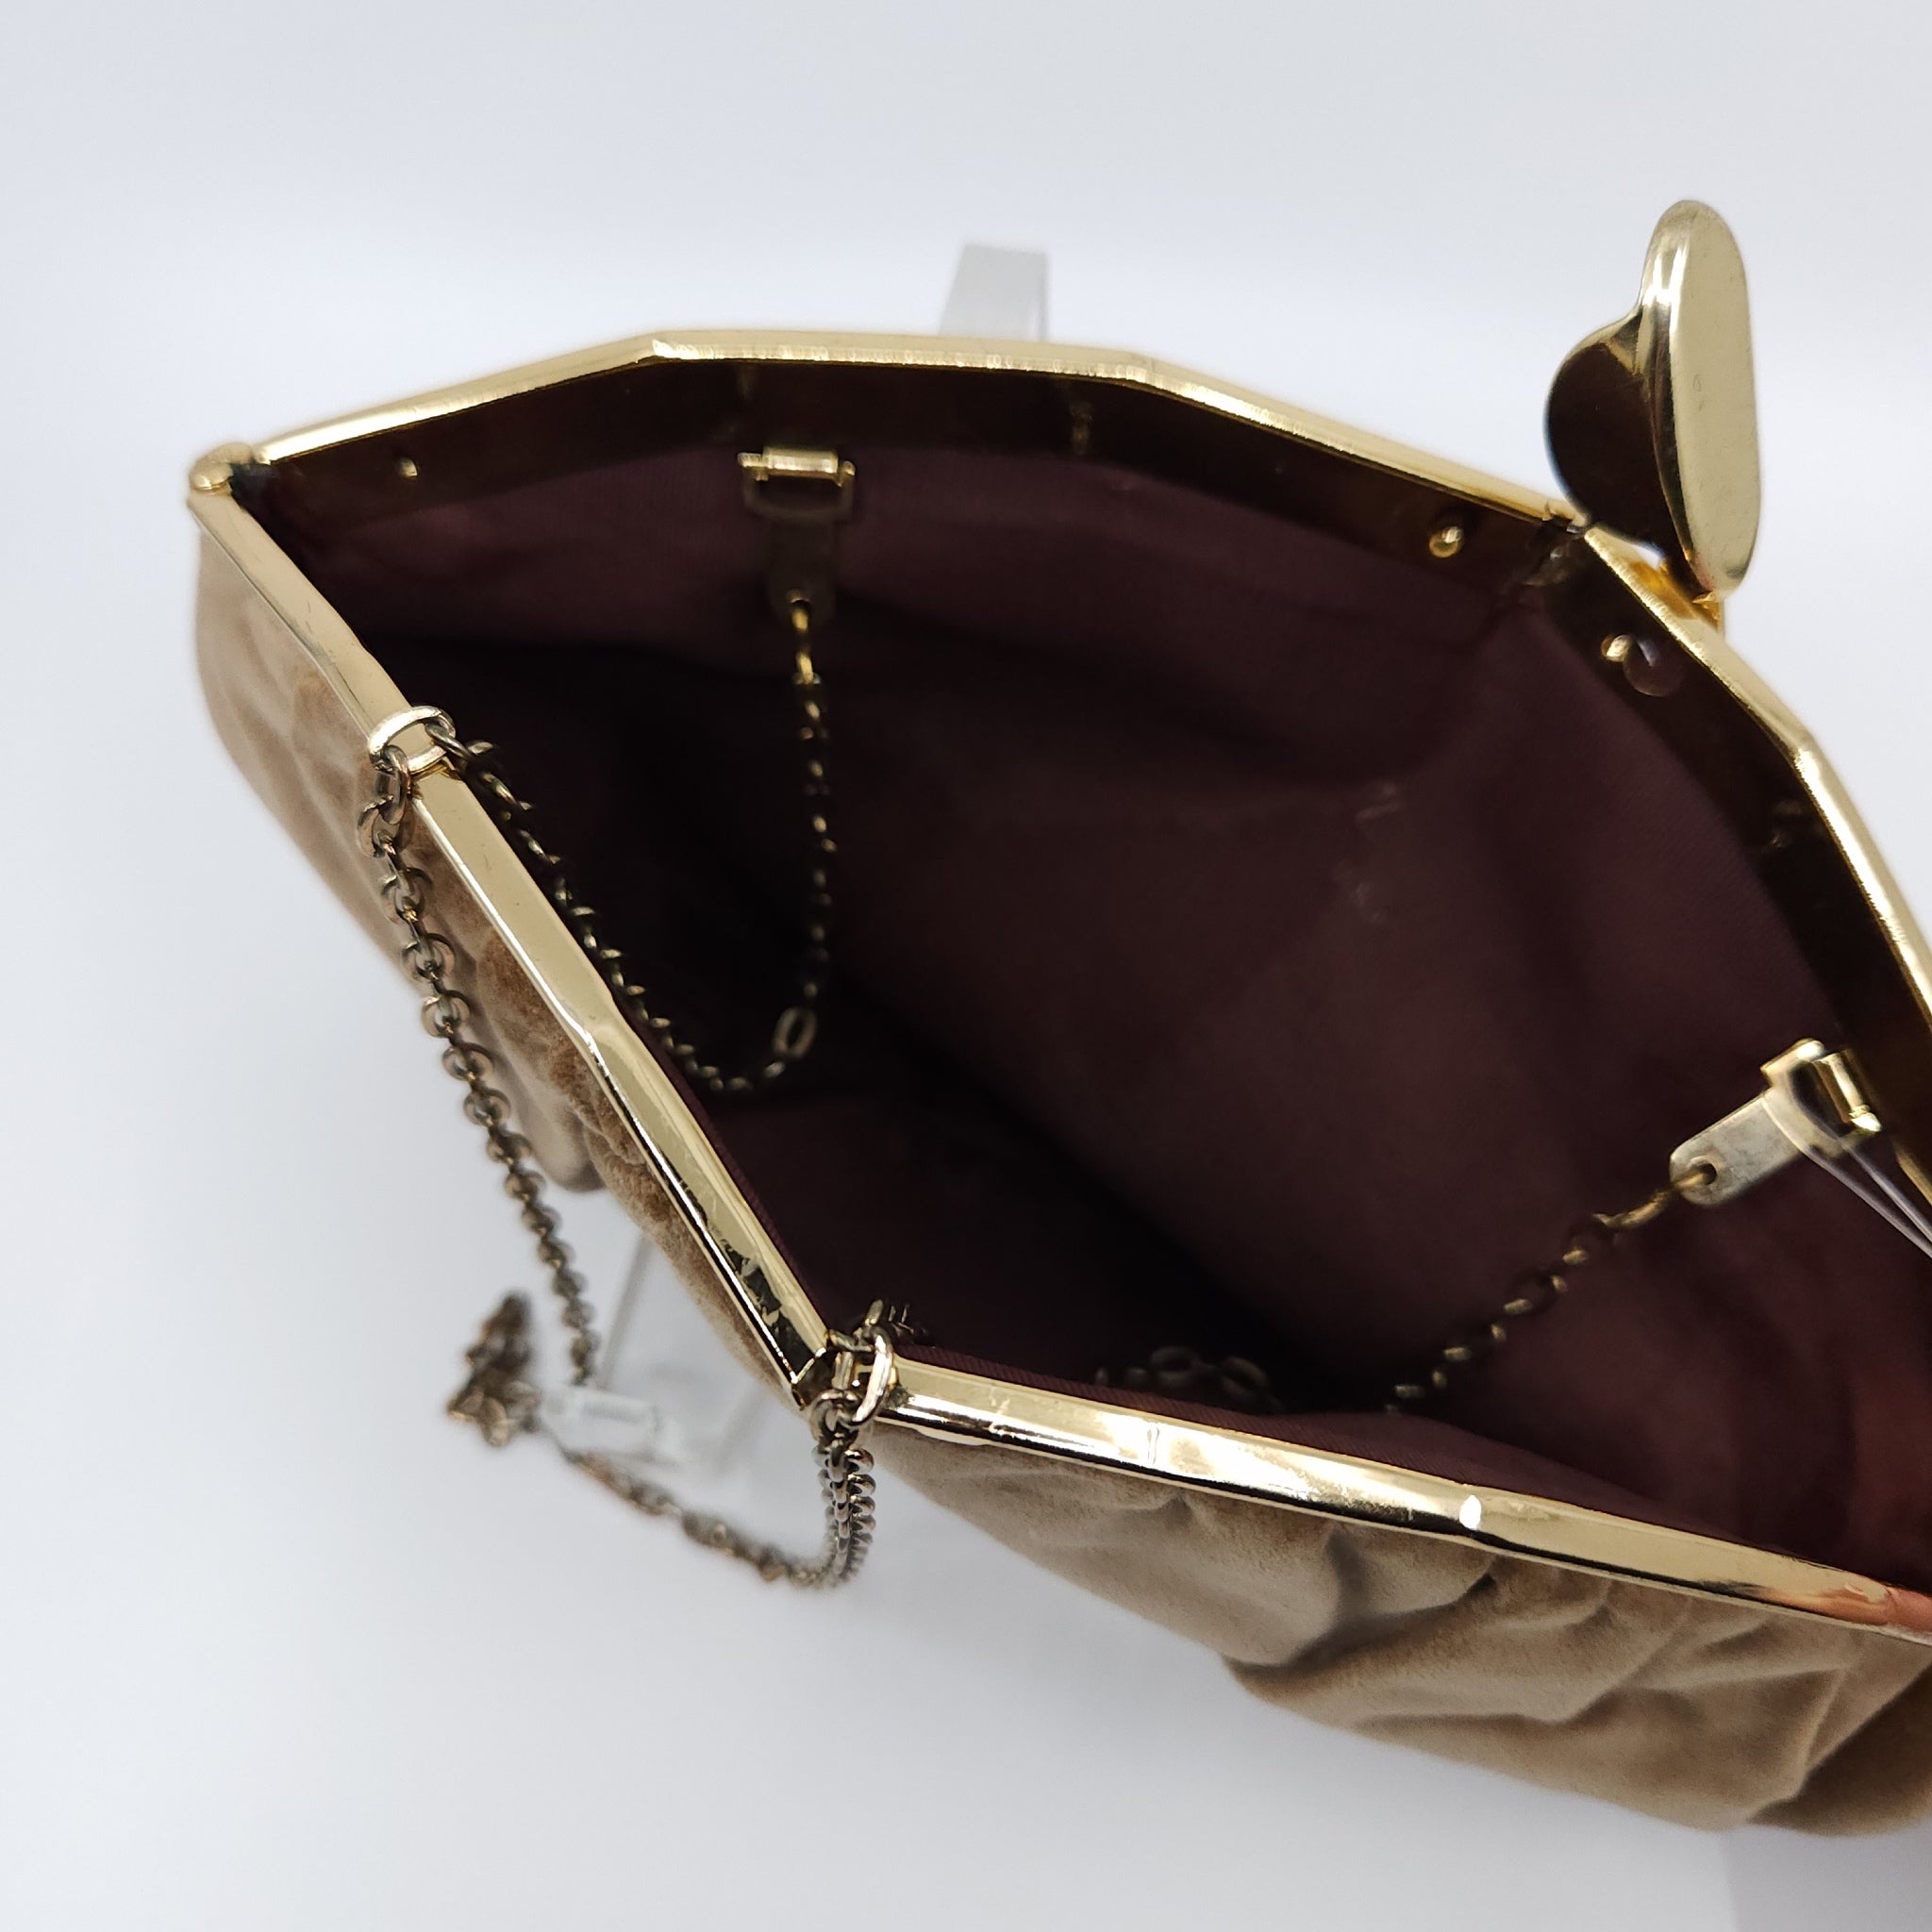 Vintage Toffee Velvet Clutch with Chain Strap